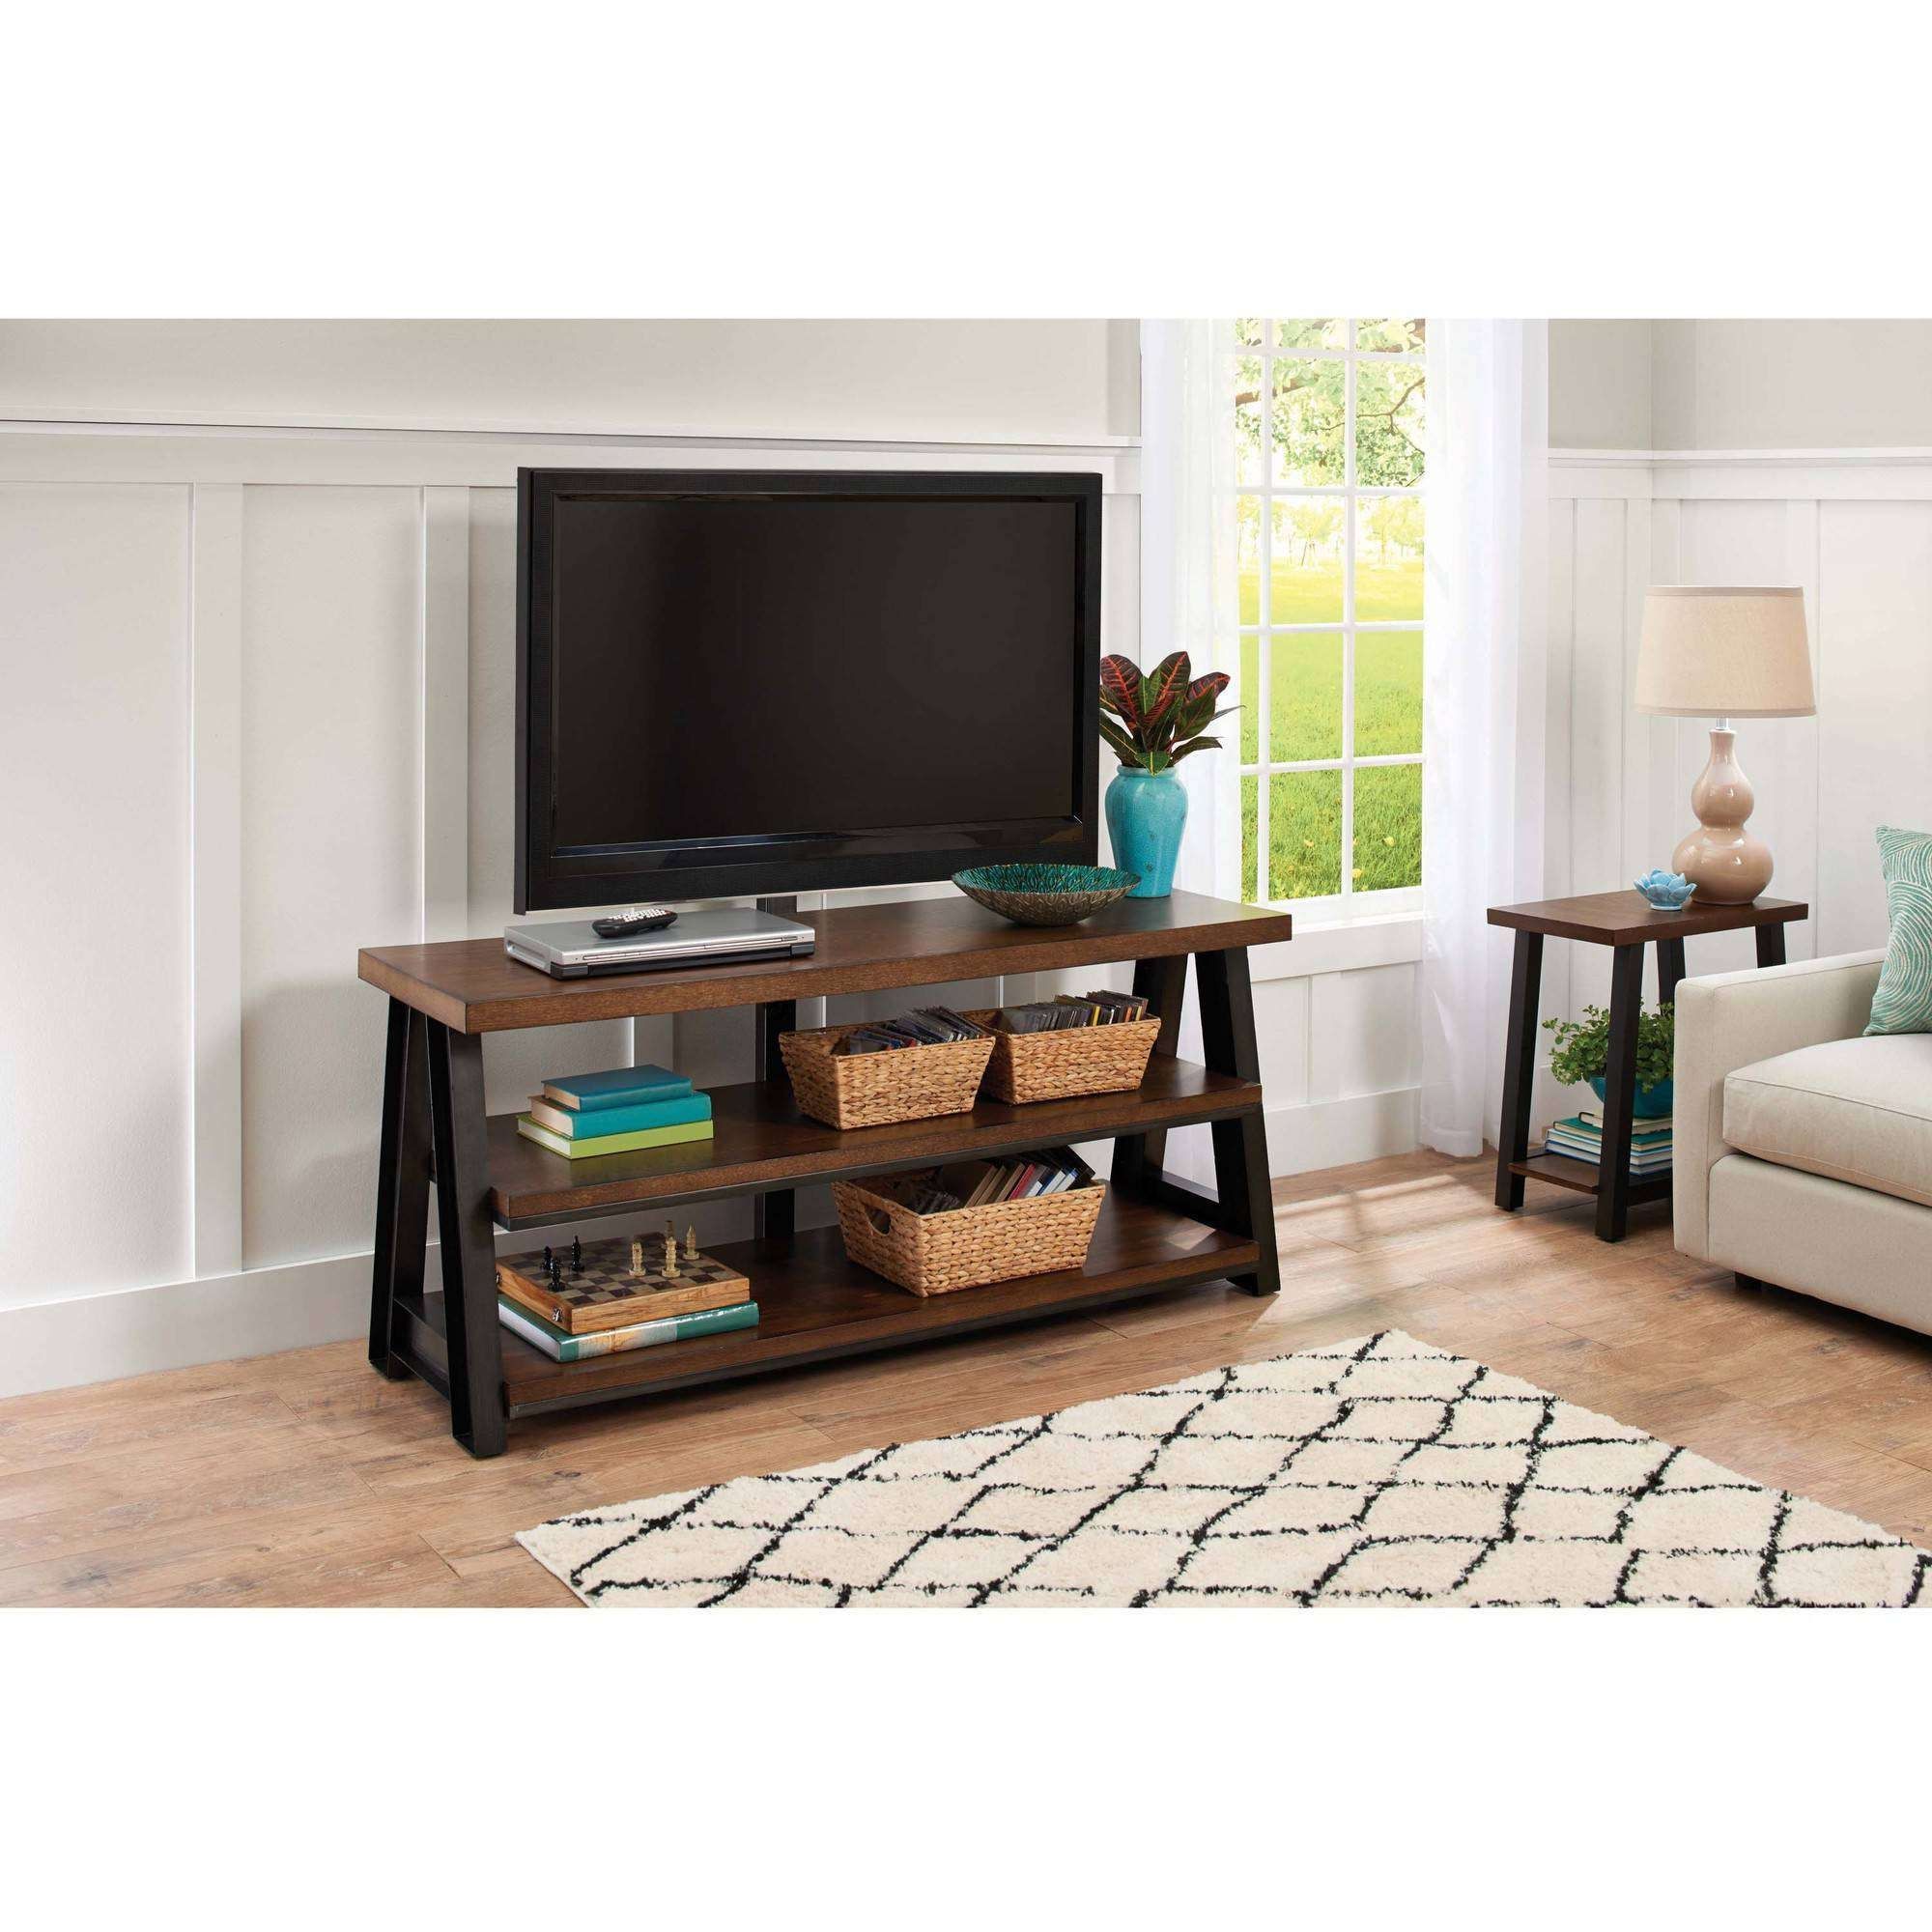 Tv : Amazing Cherry Wood Tv Cabinets Better Homes And Gardens Pertaining To Cherry Wood Tv Cabinets (View 16 of 20)